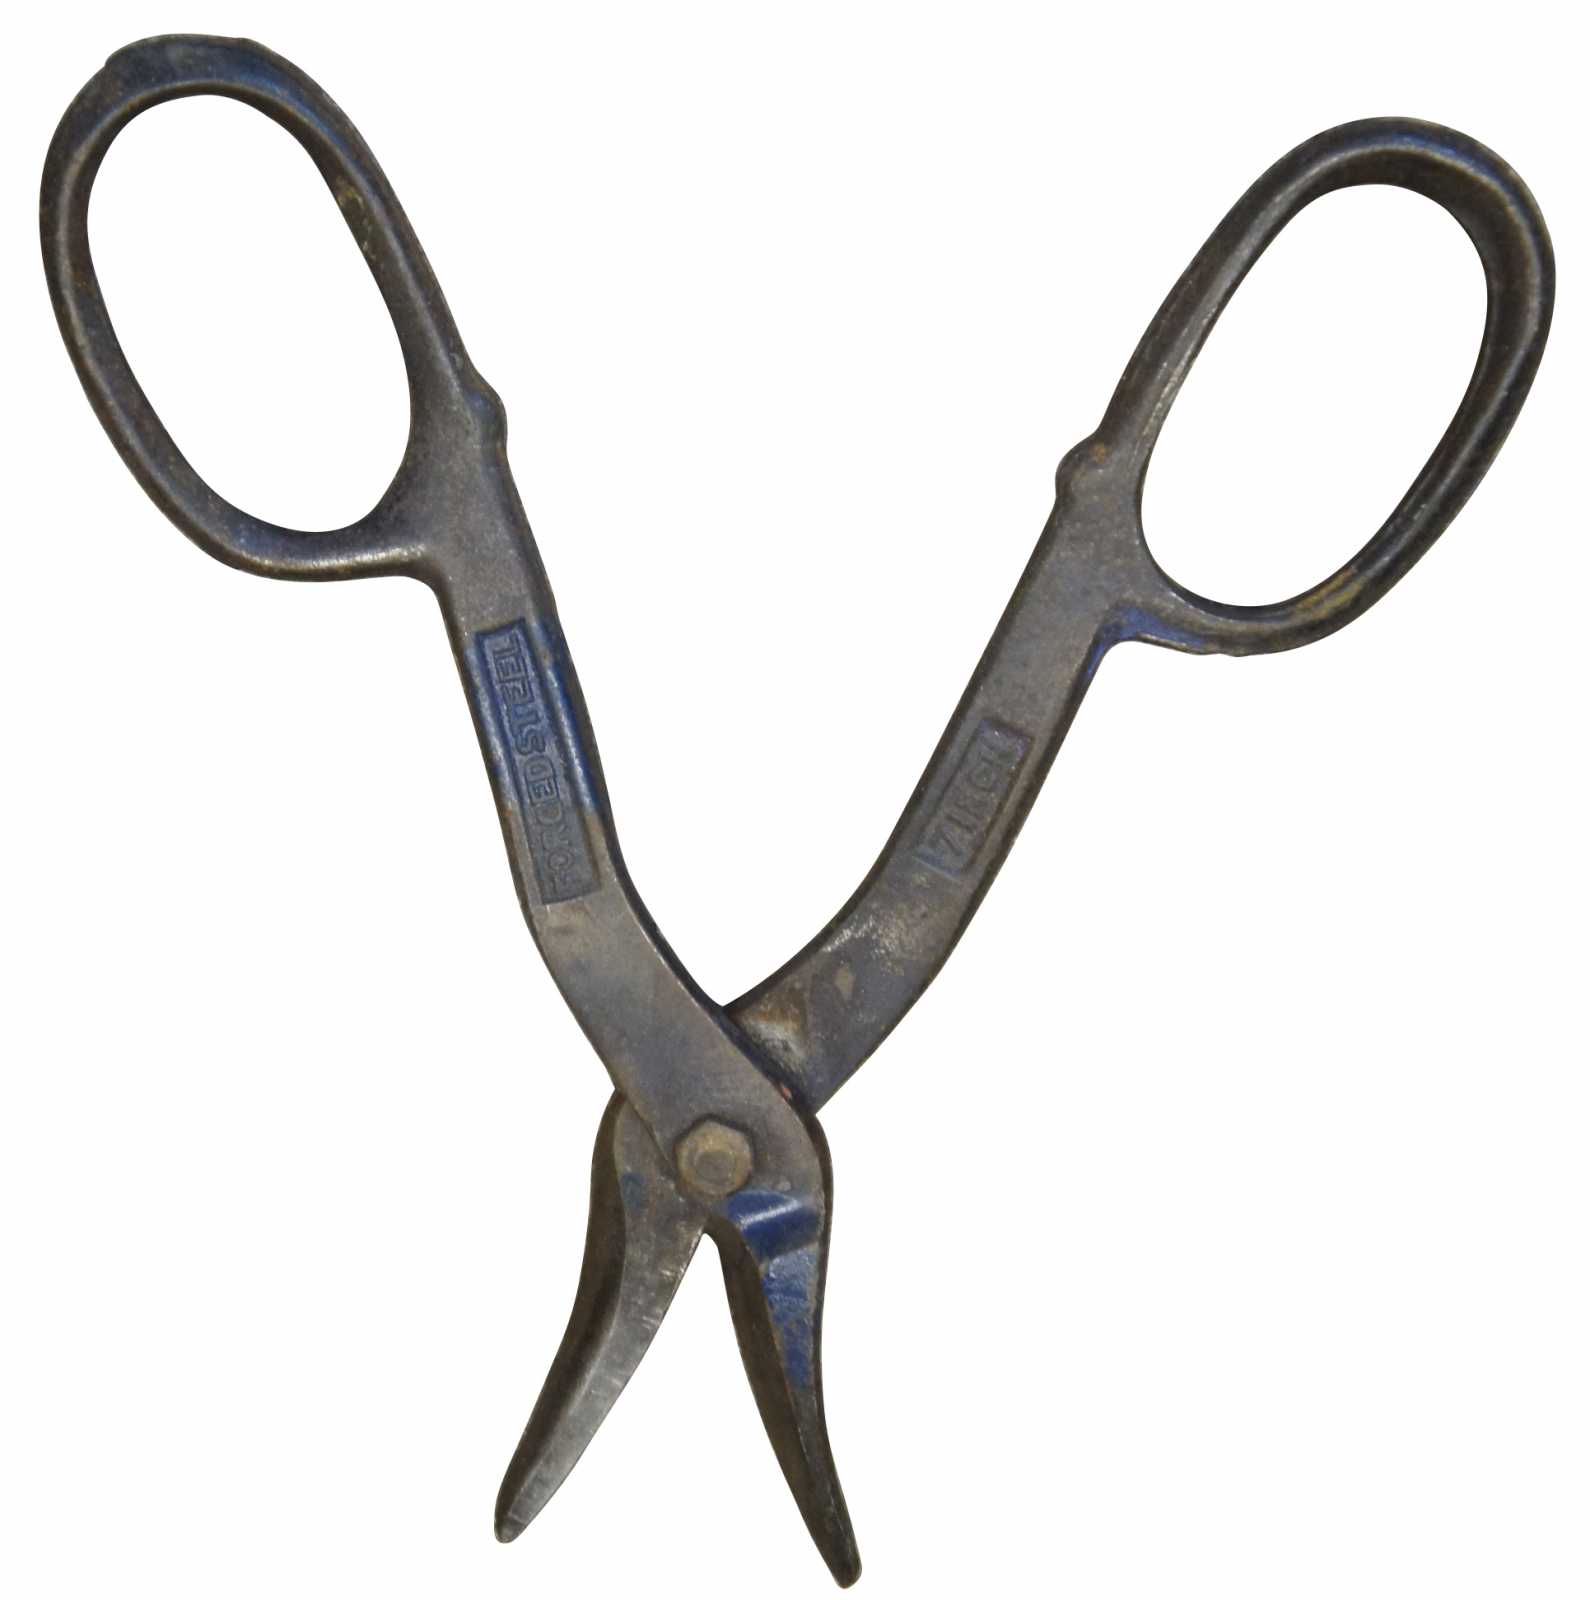 vintage USA made forged steel metal shears & tin snips, industrial  metalworking tools